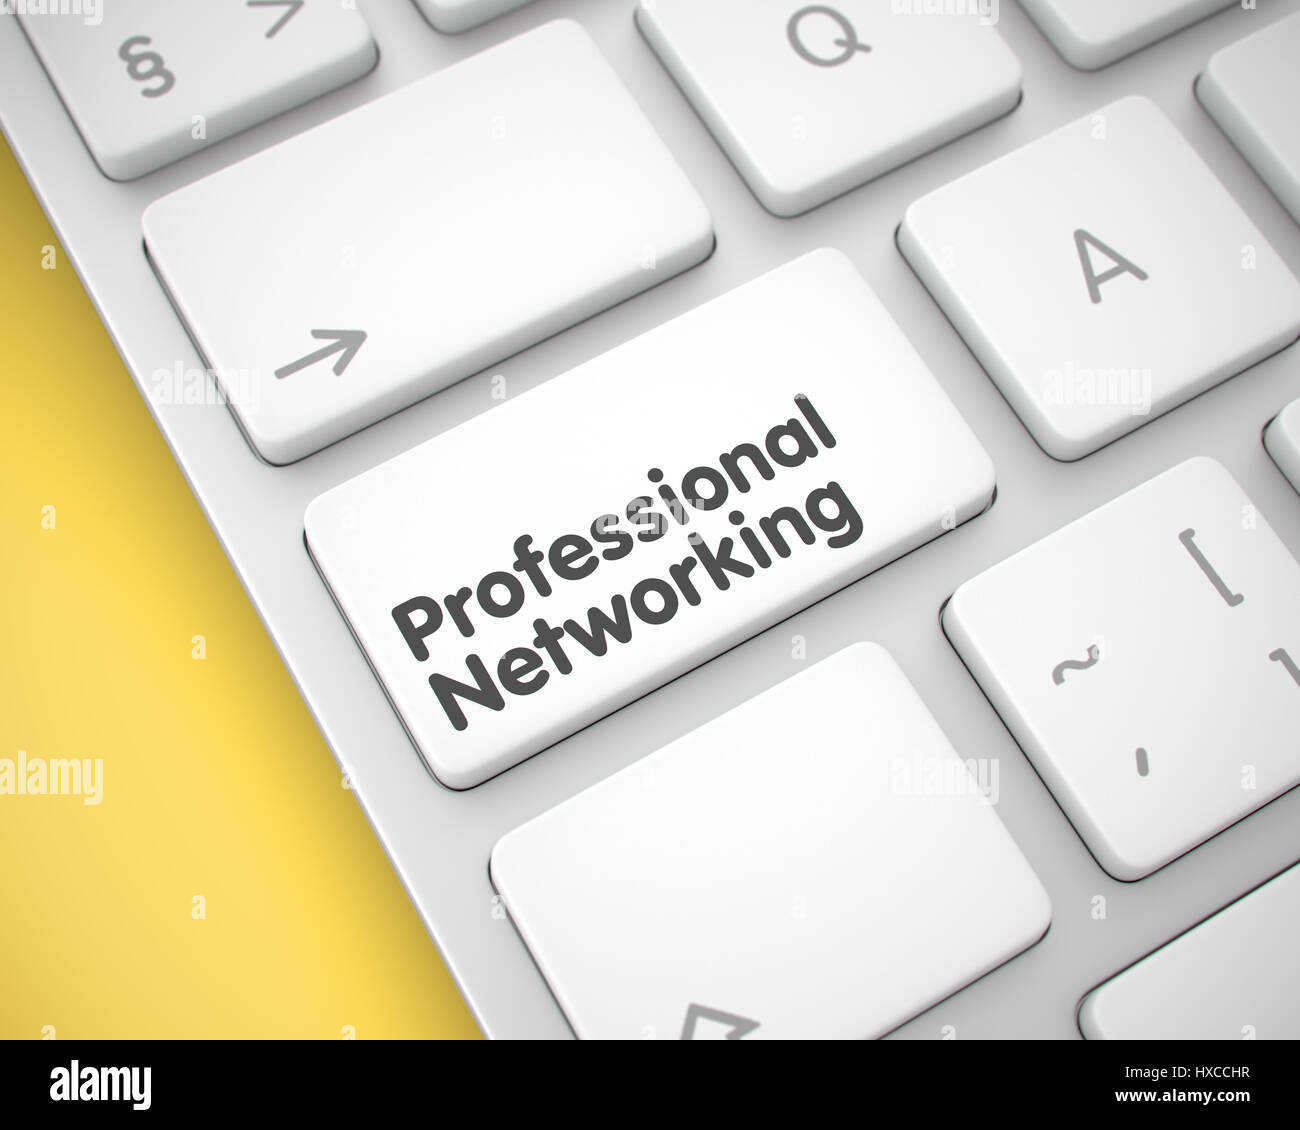 Professional Networking - Text on the White Keyboard Key. 3D. Stock Photo